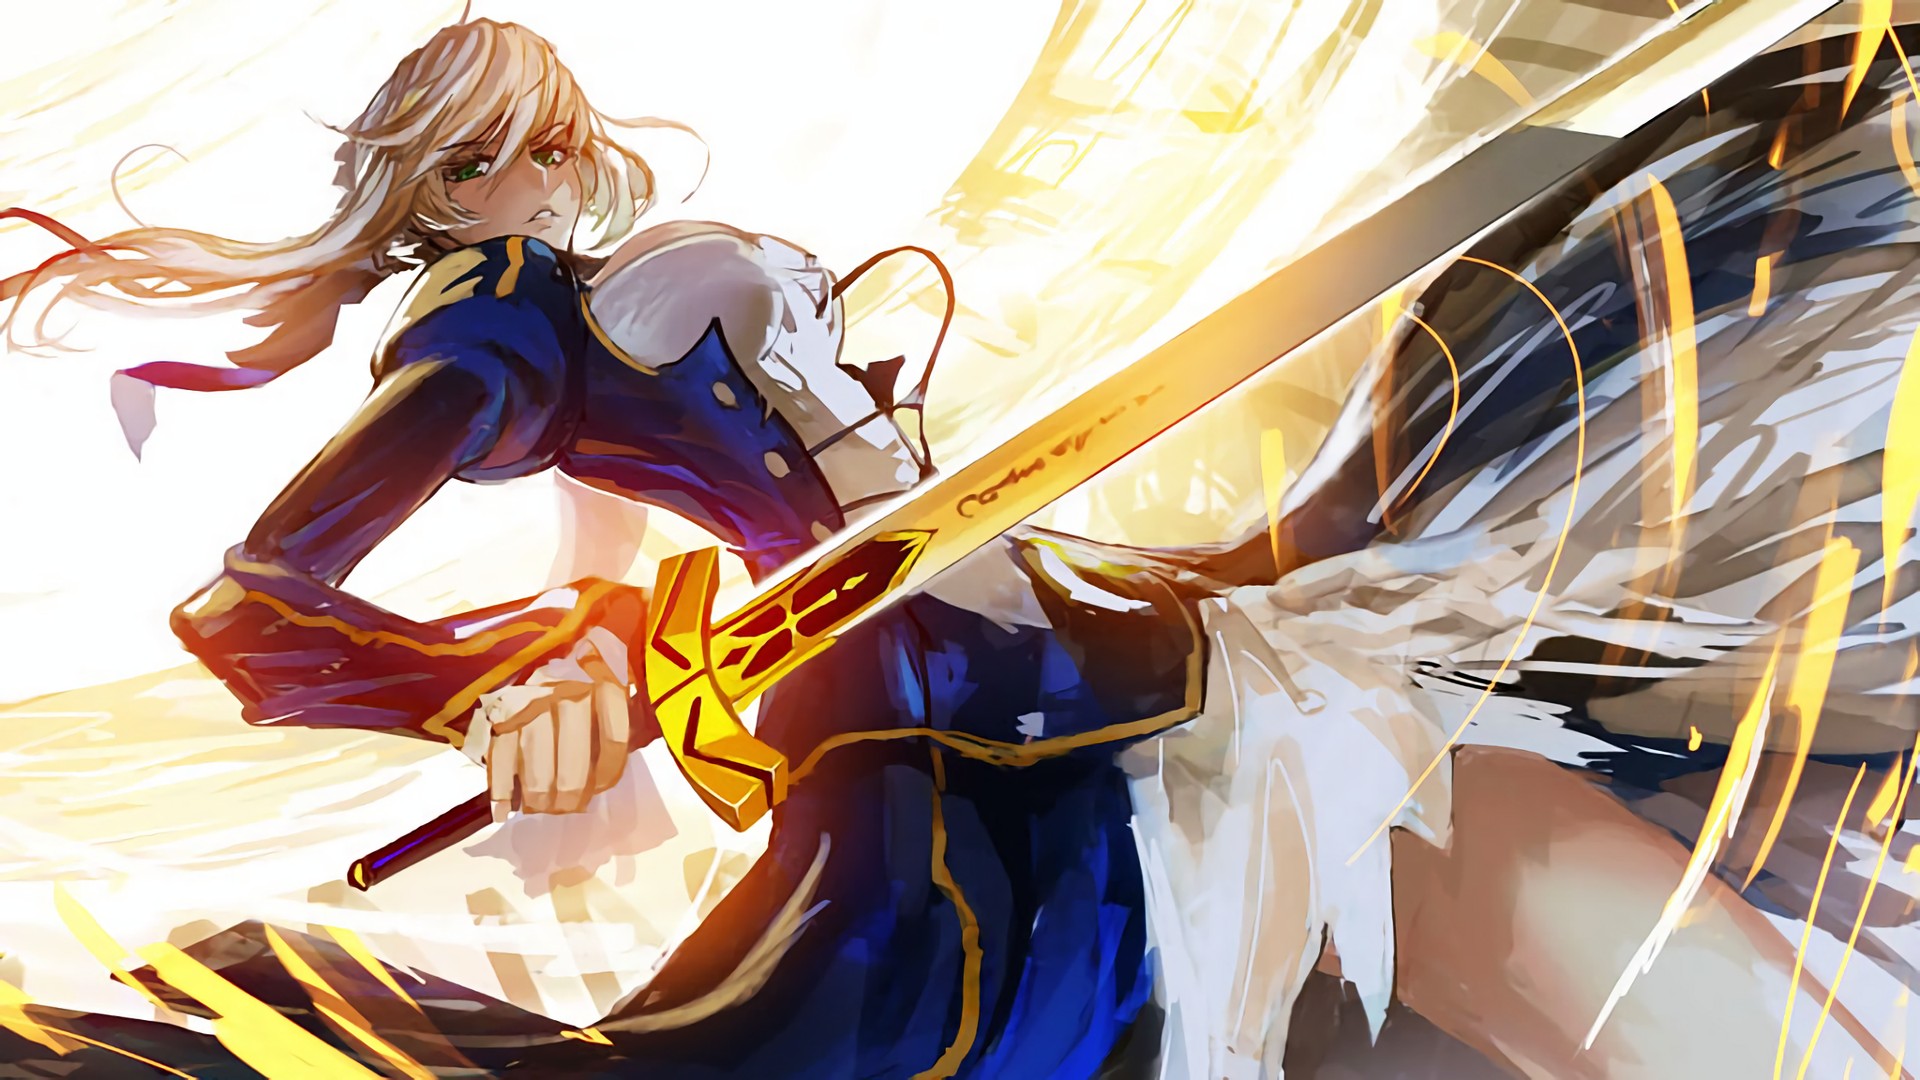 Fate Series, Fate Stay Night, Anime girls, Saber Wallpaper